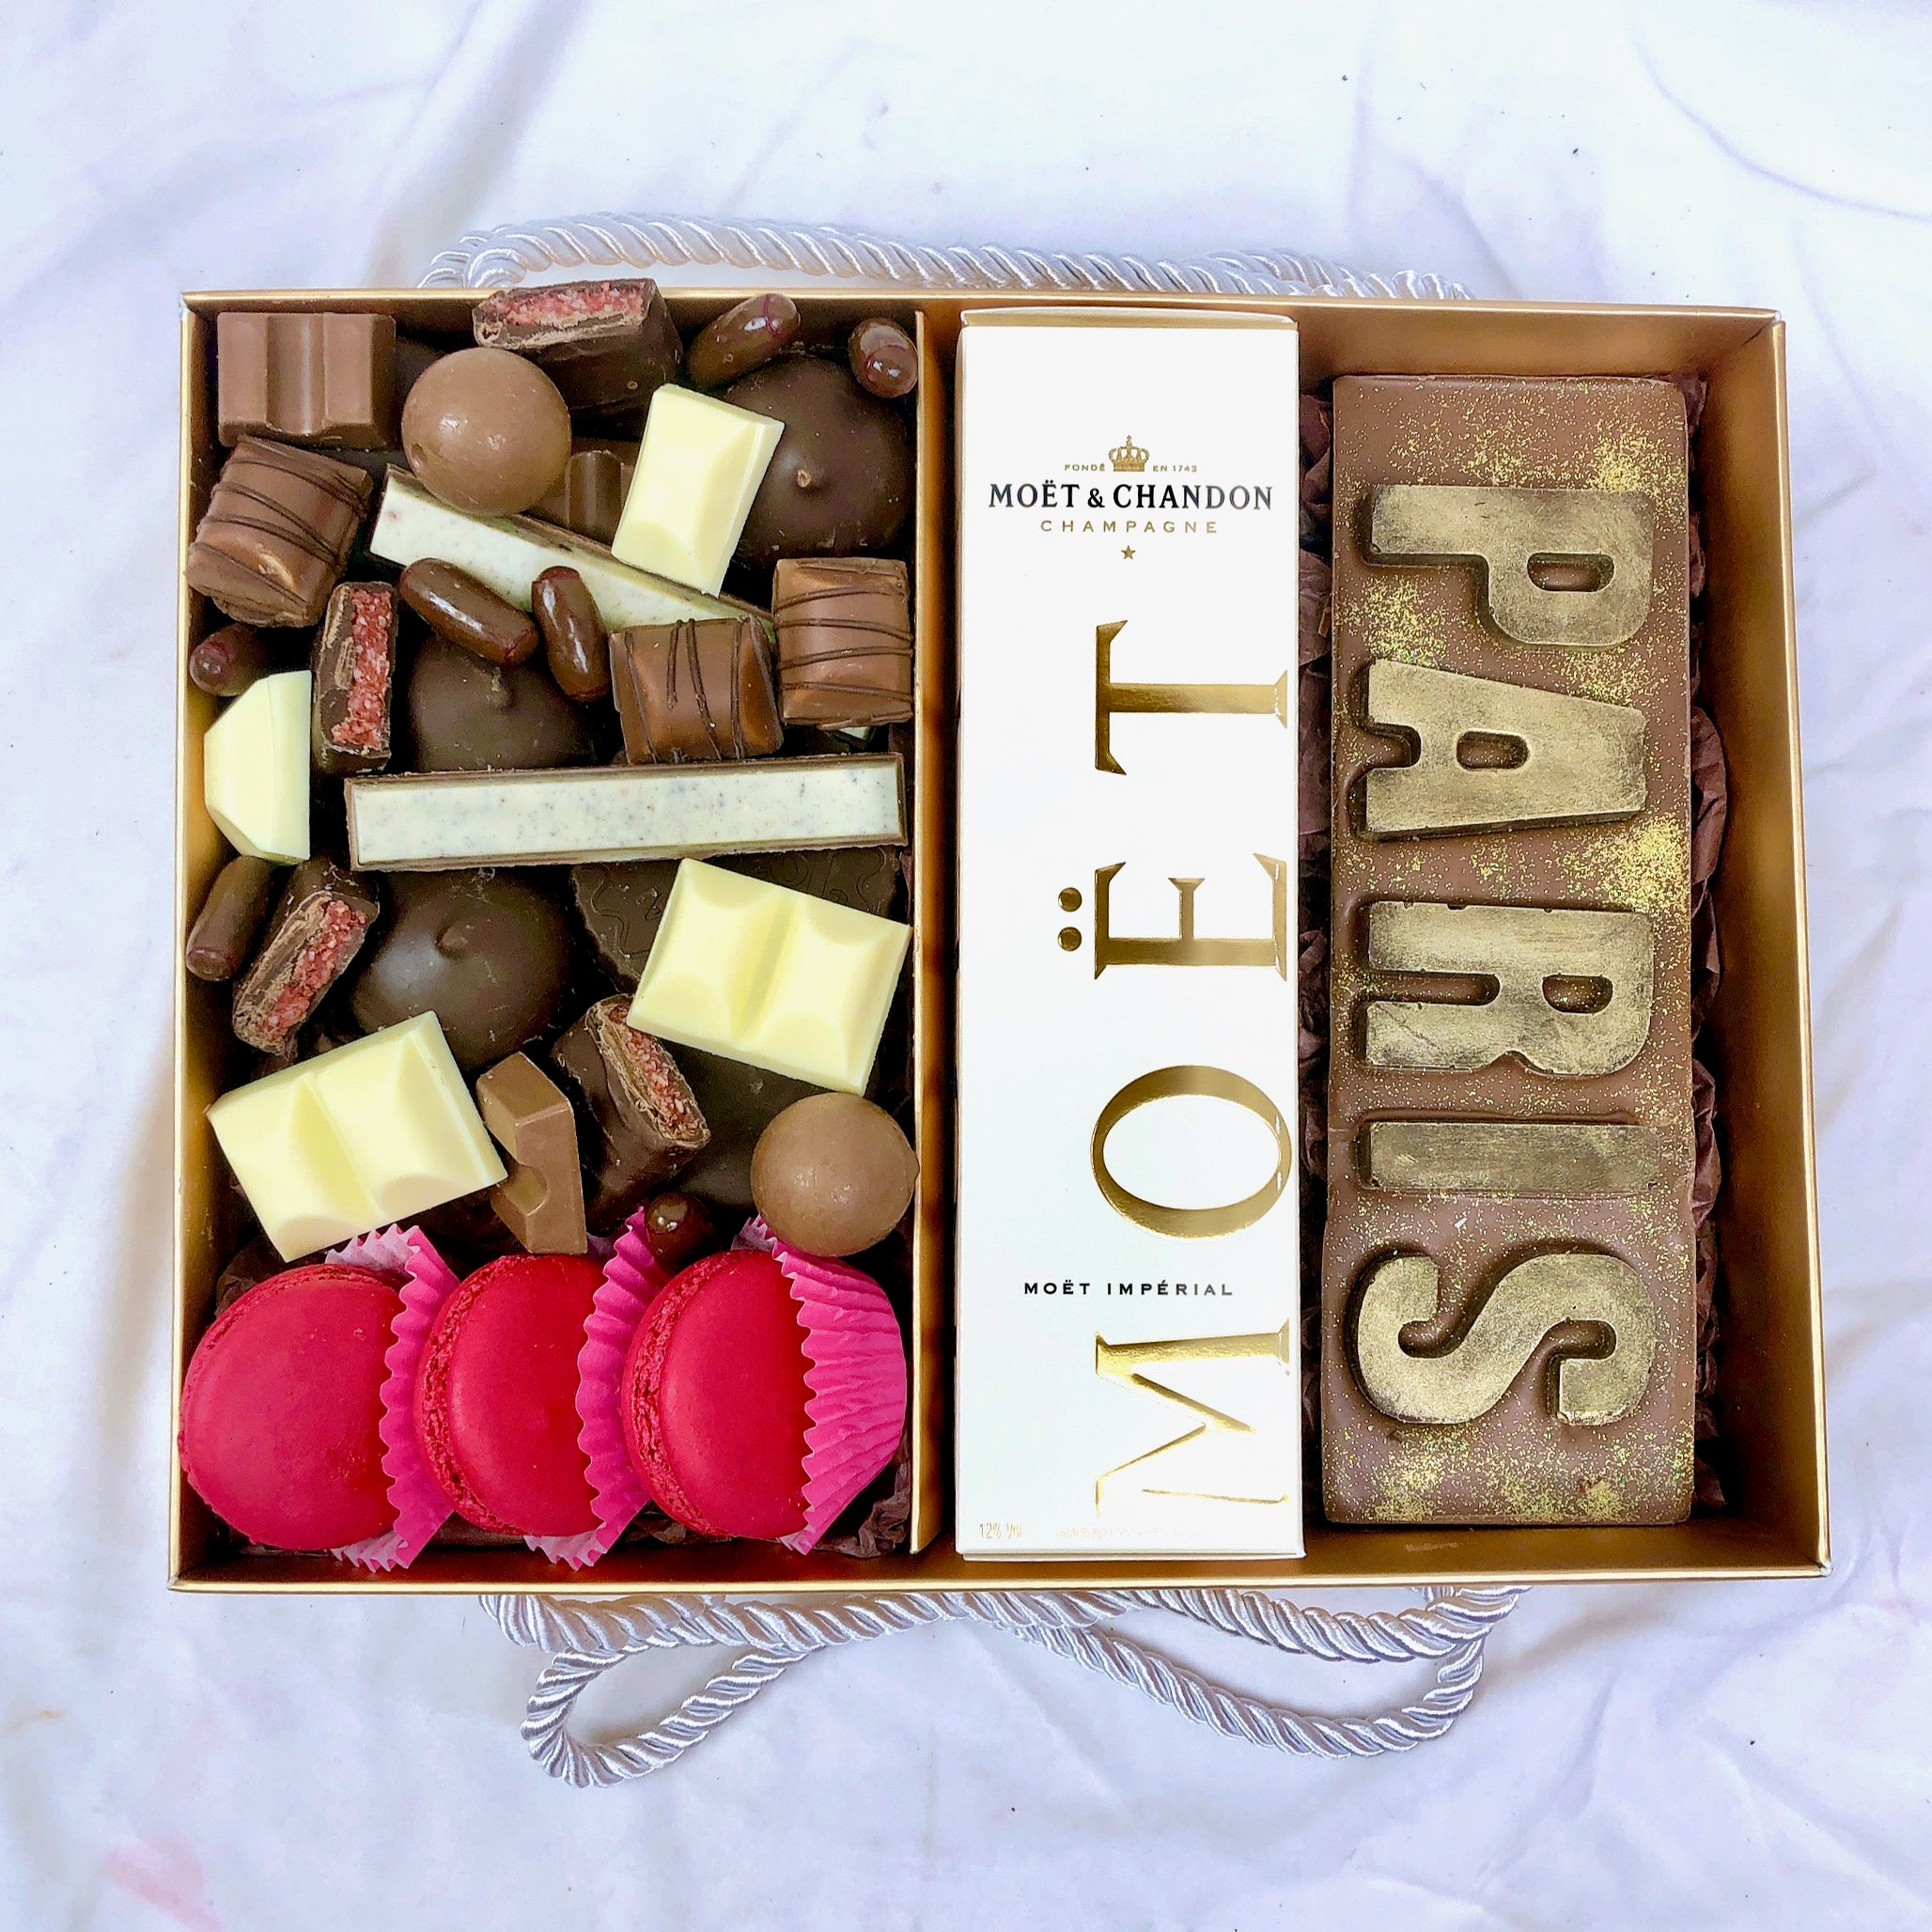 "PARIS" Personalised Chocolate Letters Hamper, chocolate assortment box was macarons and champagne same day delivery gift Adelaide